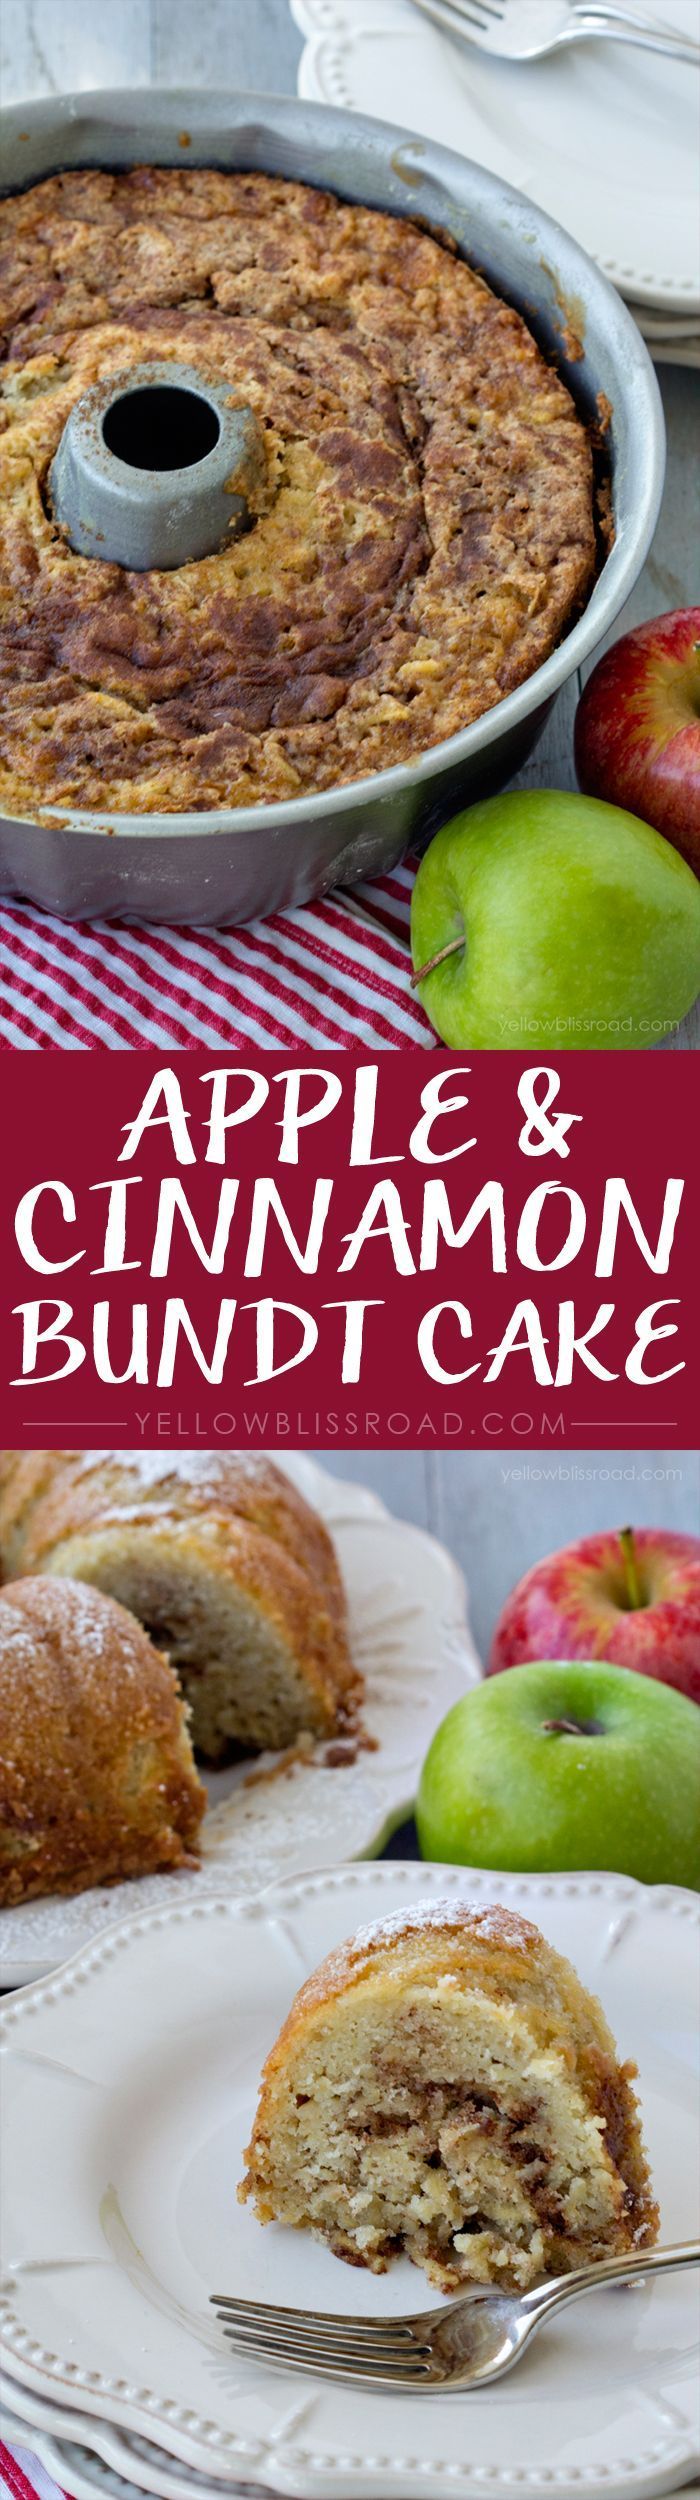 Apple & Cinnamon Bundt Cake – Not too sweet and a perfect dessert for fall!